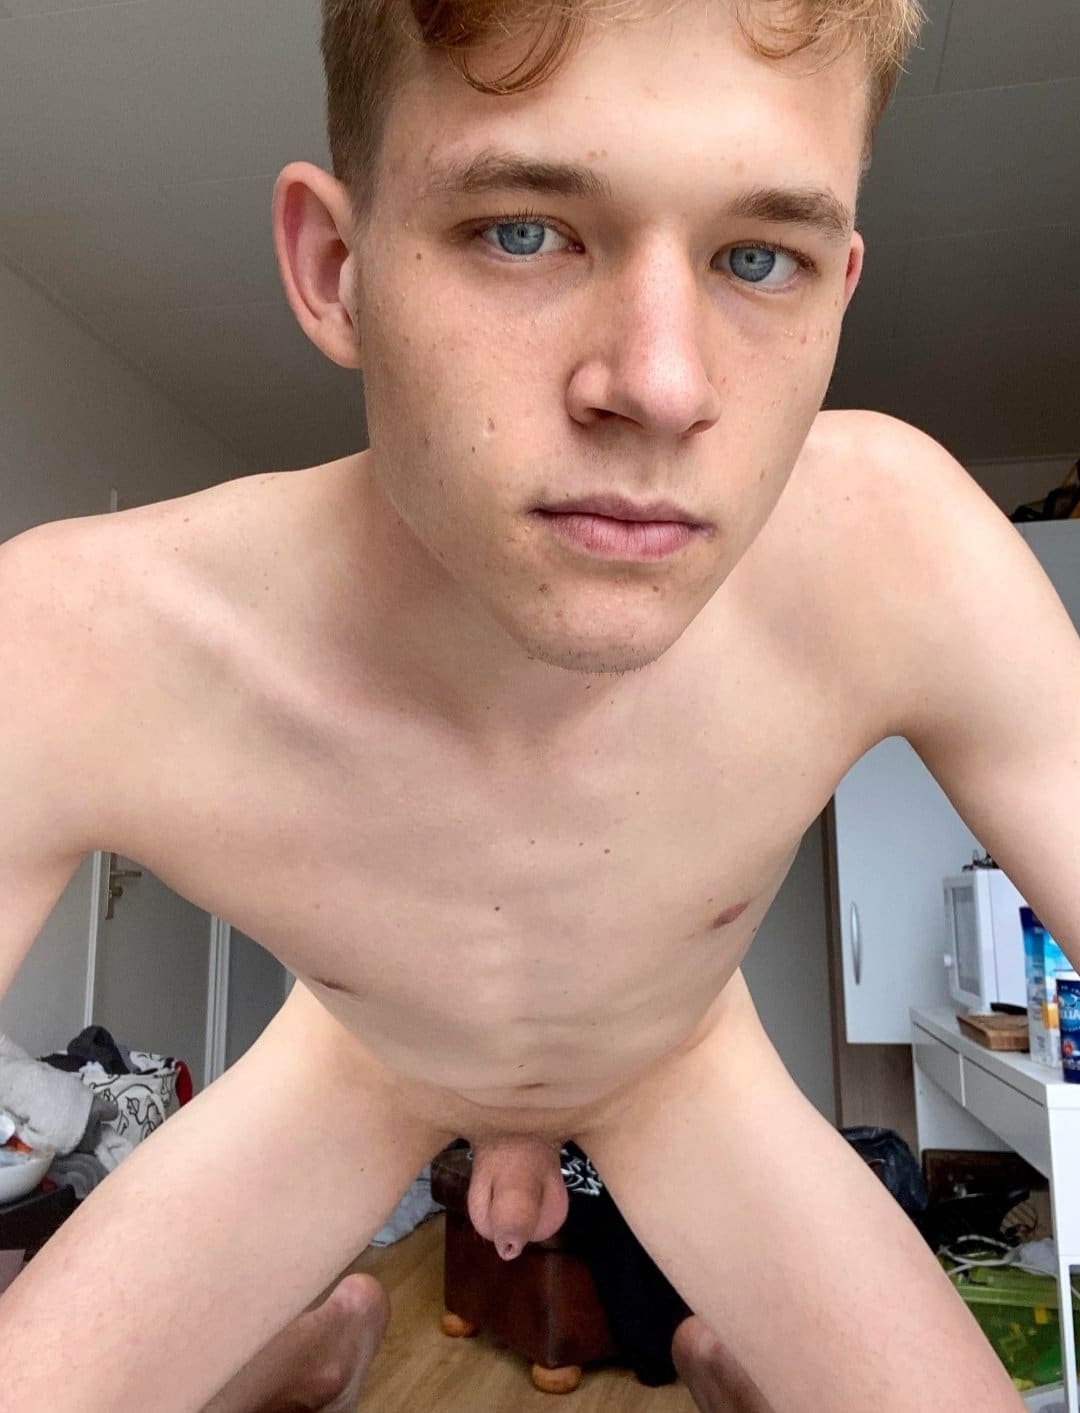 Boy with a soft dick